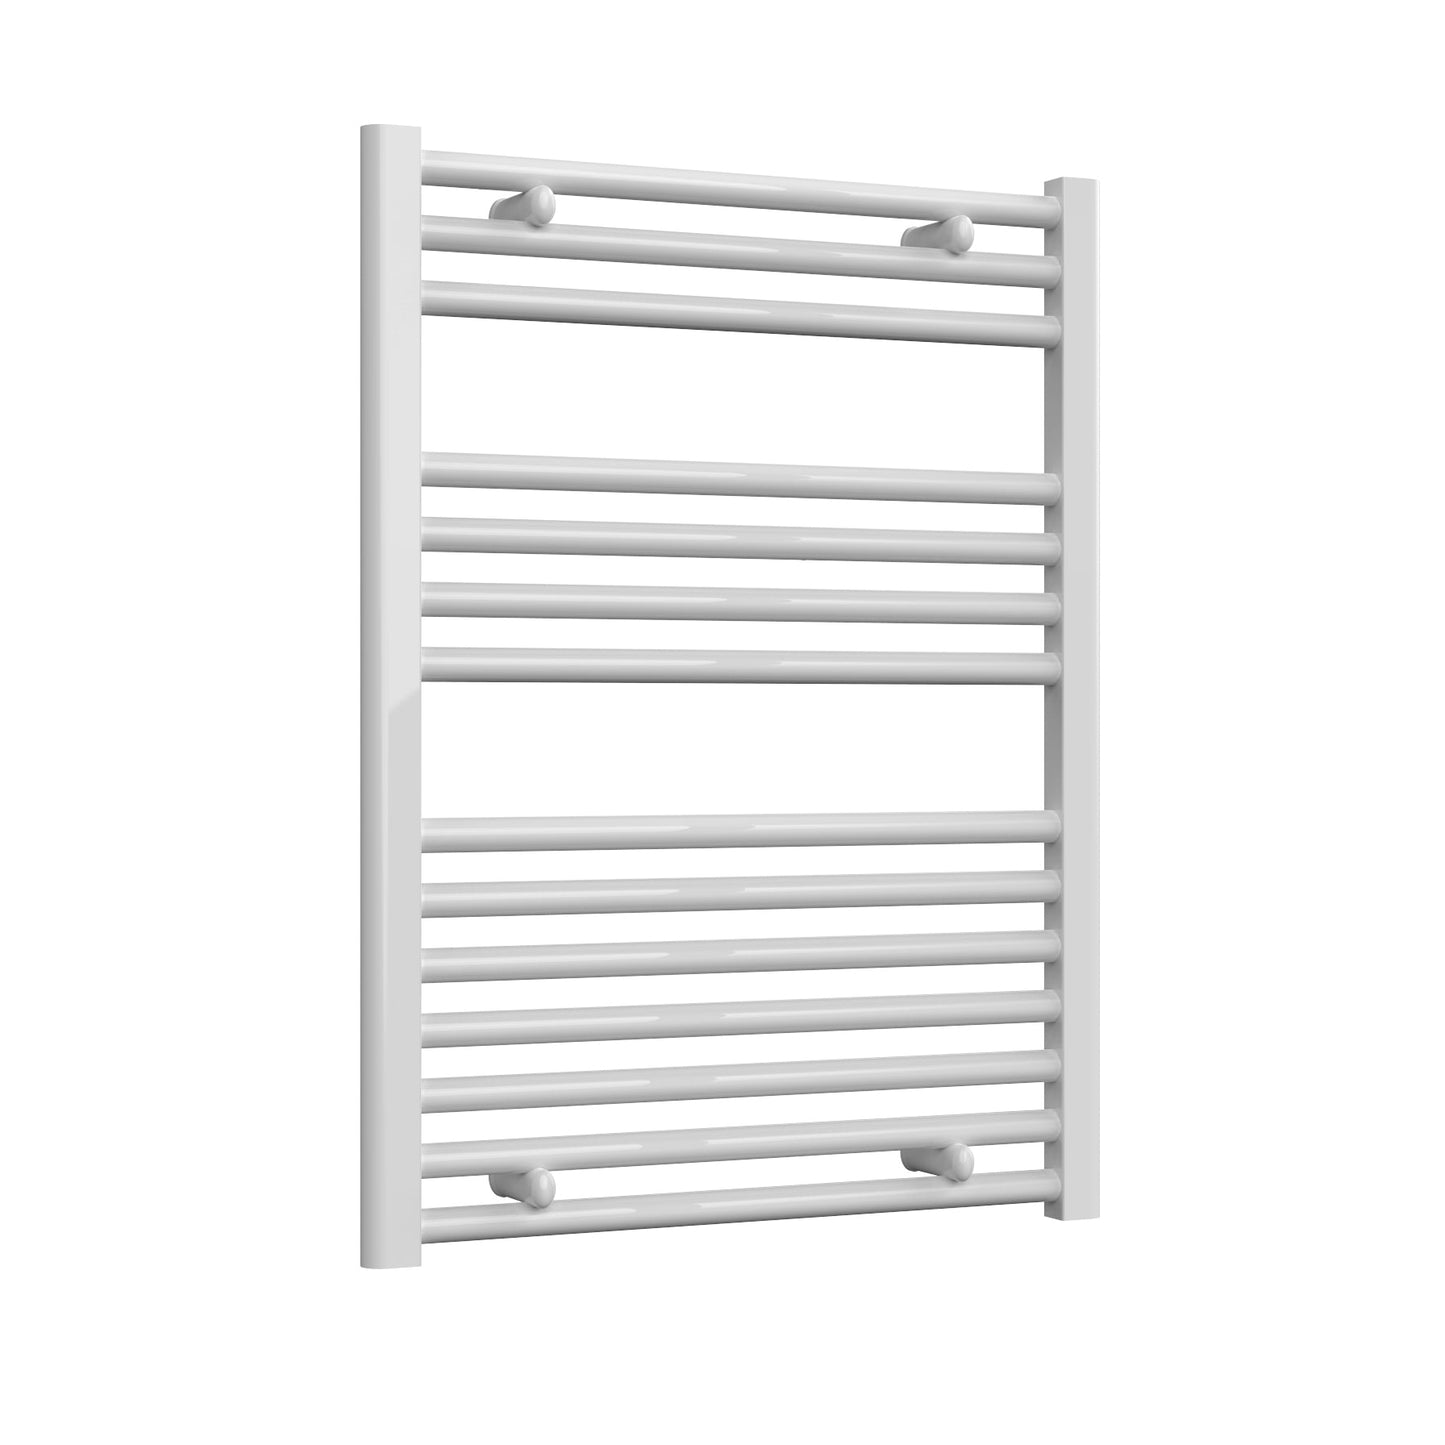 Diva Electric Heated Towel Rail -Various Sizes - White